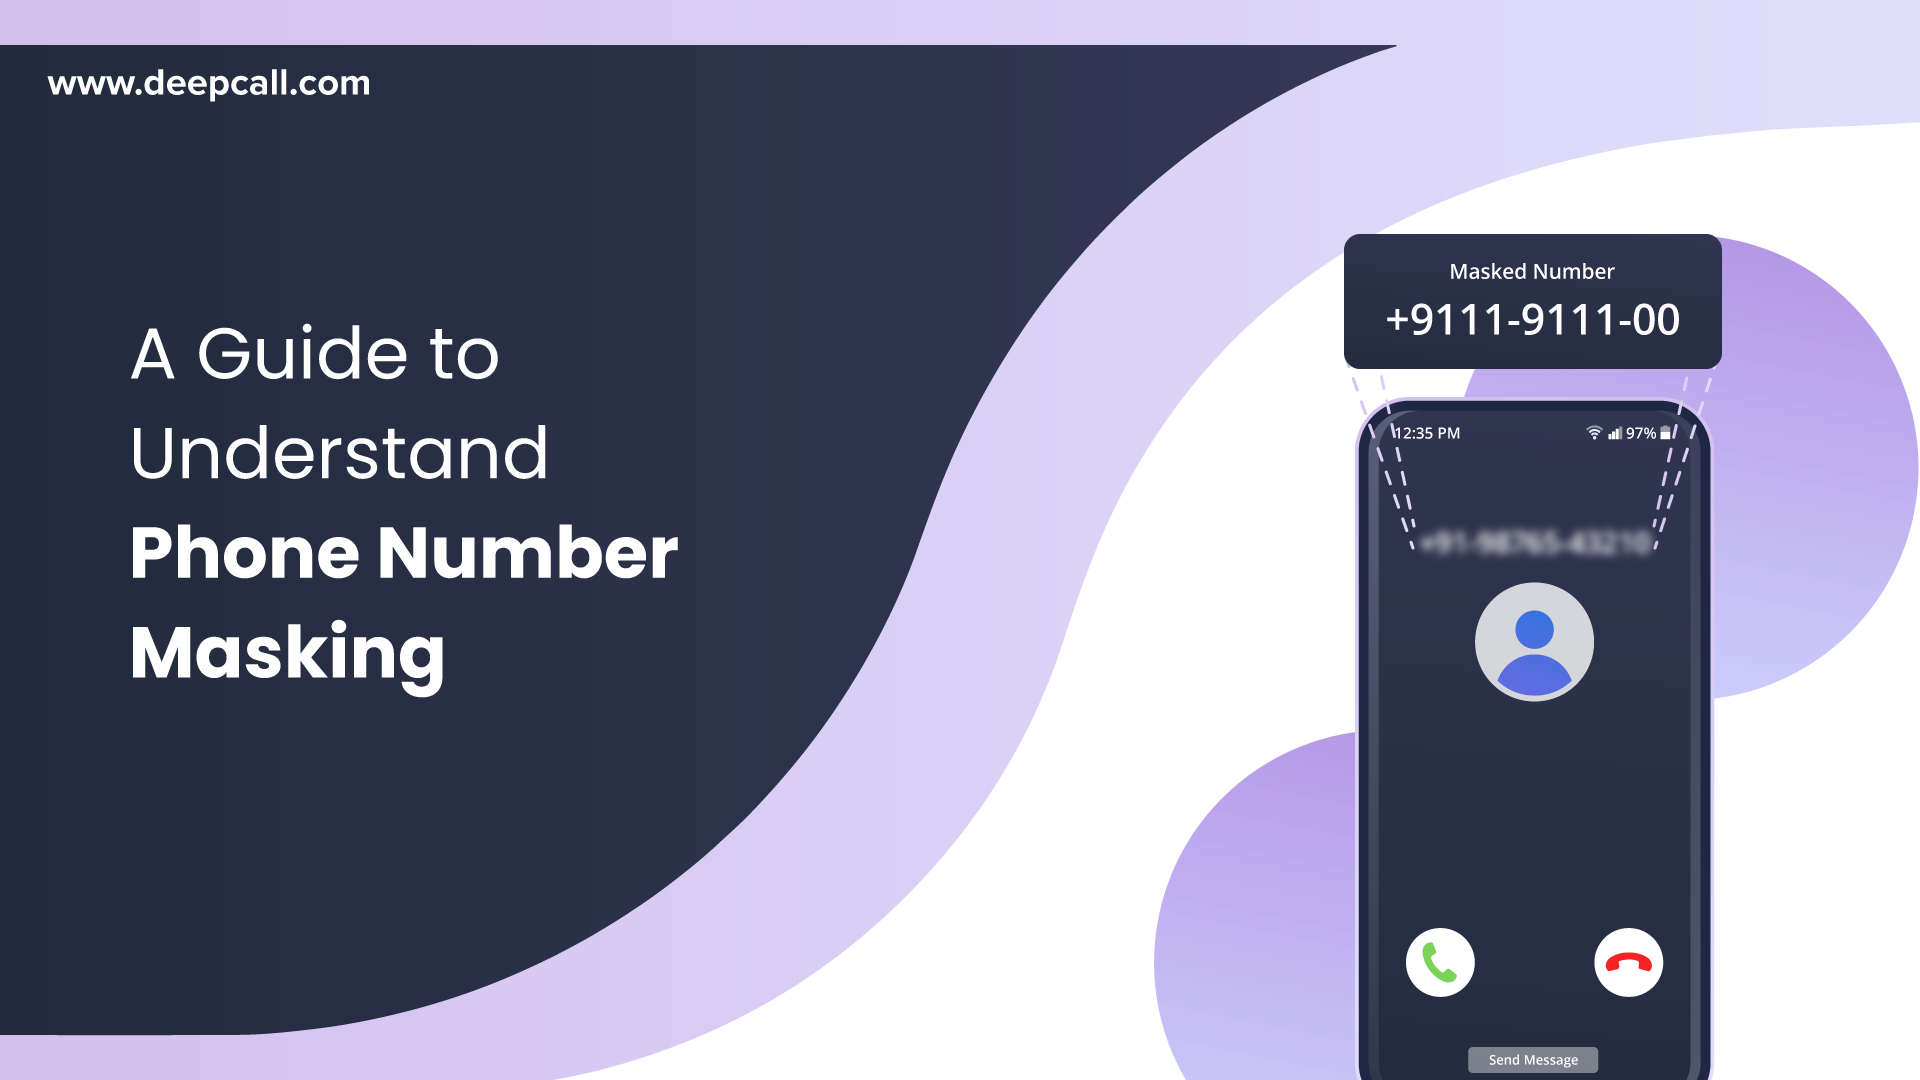 A Guide to Understand Phone Number Masking